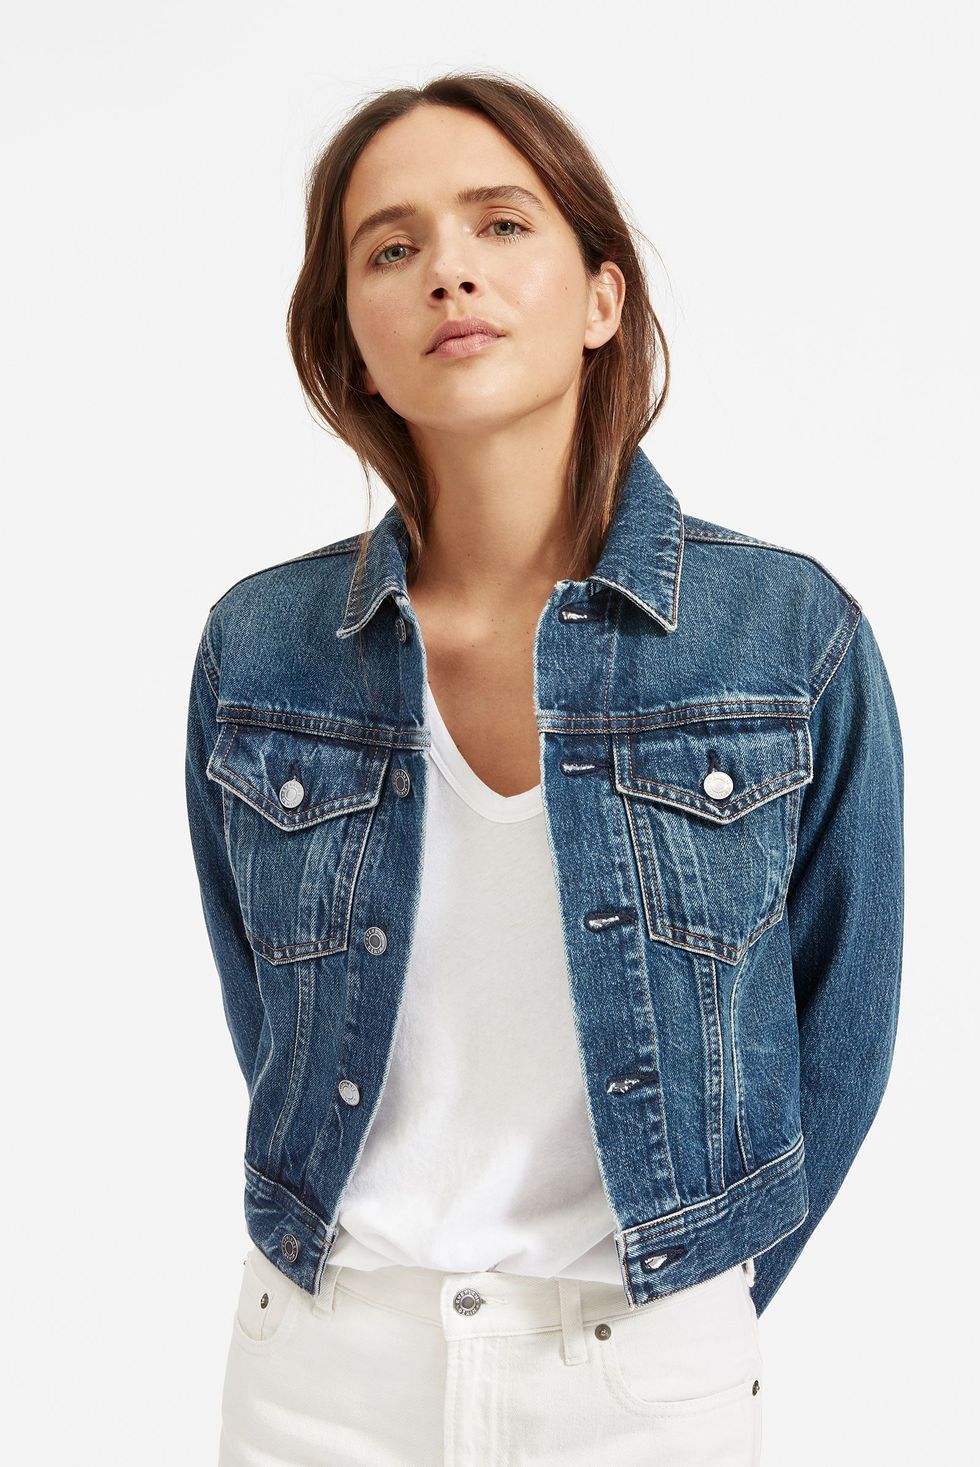 Buy Meghan Markle's Madewell Denim Jacket Before It Sells Out